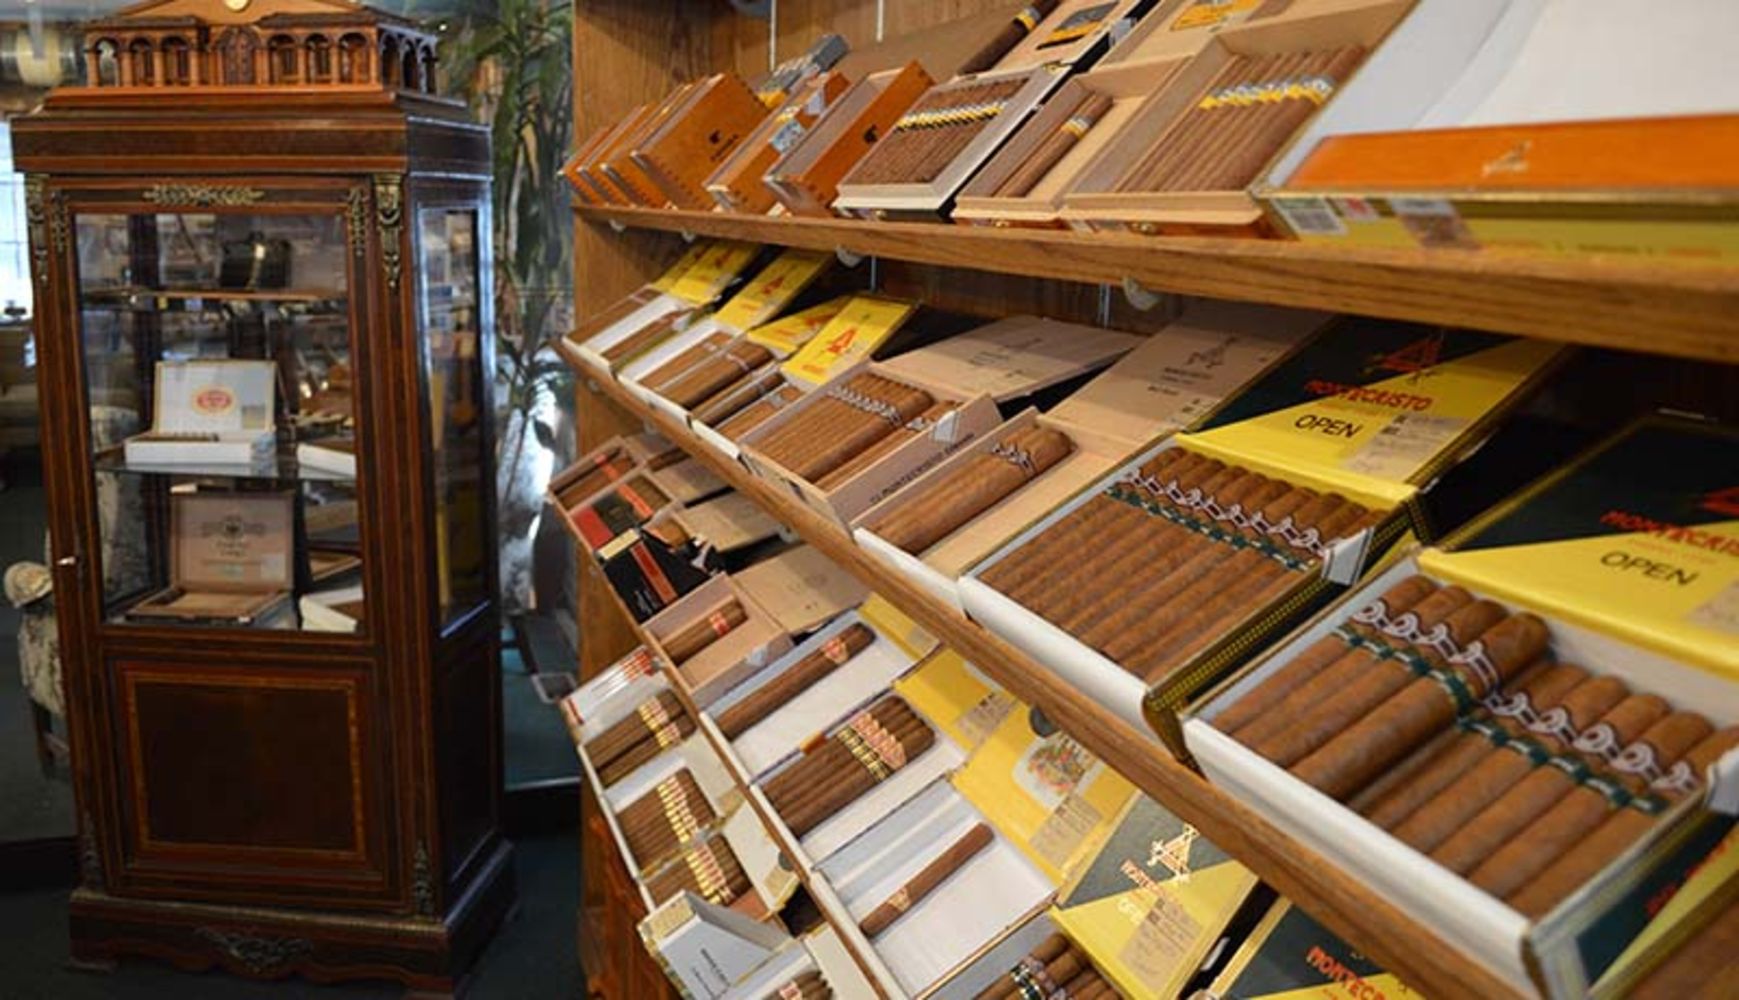 Thomas Hinds Tobacconist